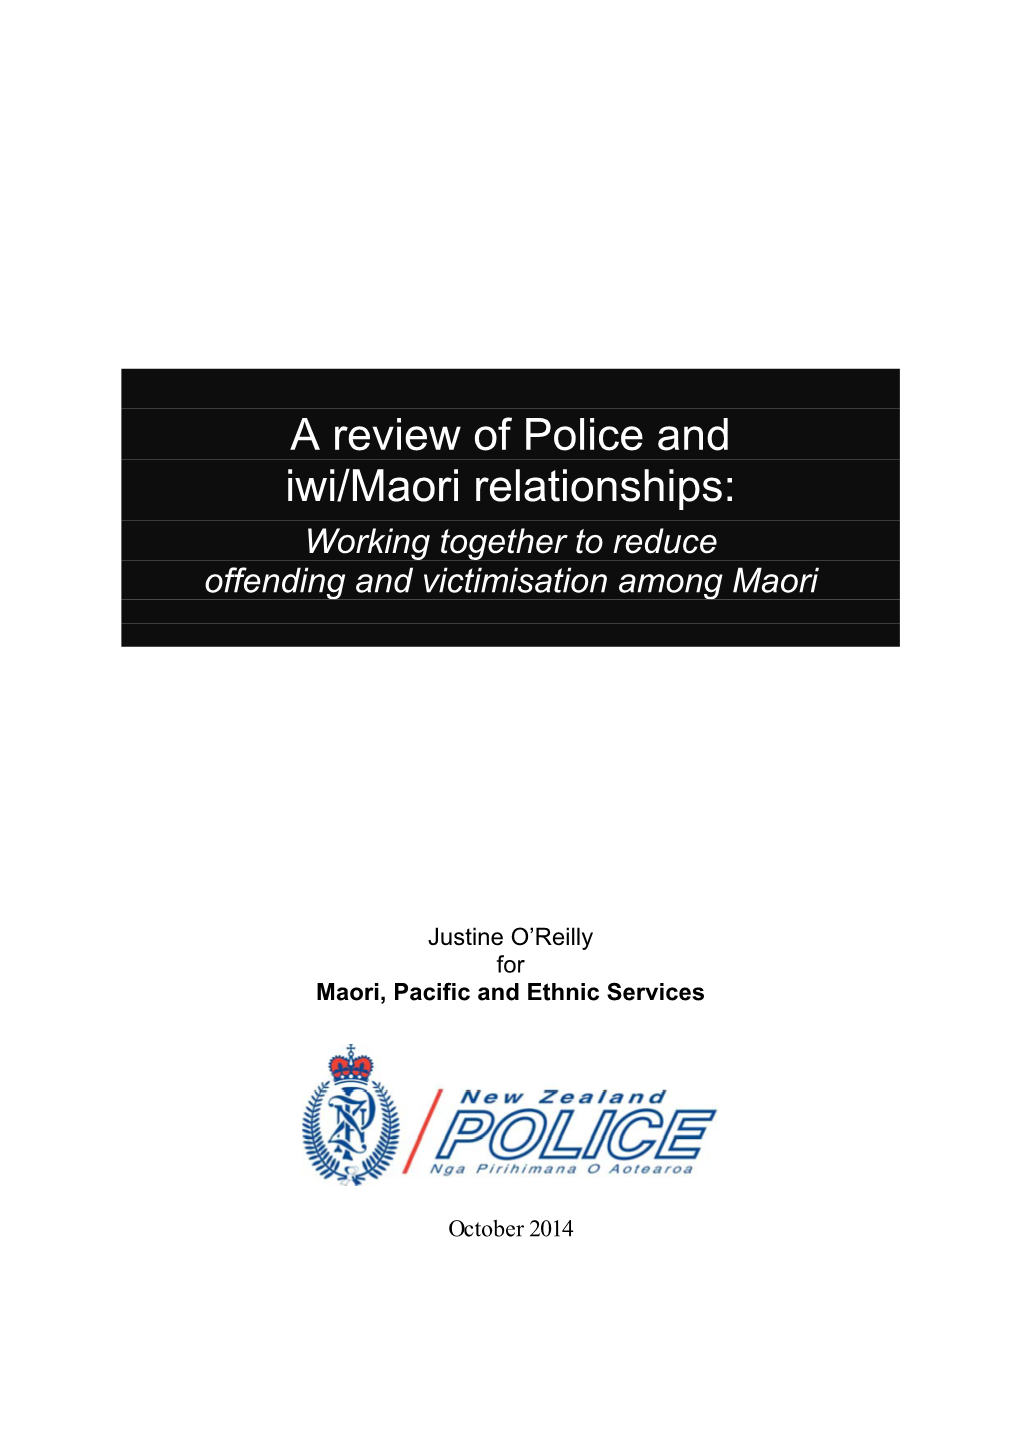 A Review of Police and Iwi/Maori Relationships: Working Together to Reduce Offending and Victimisation Among Maori